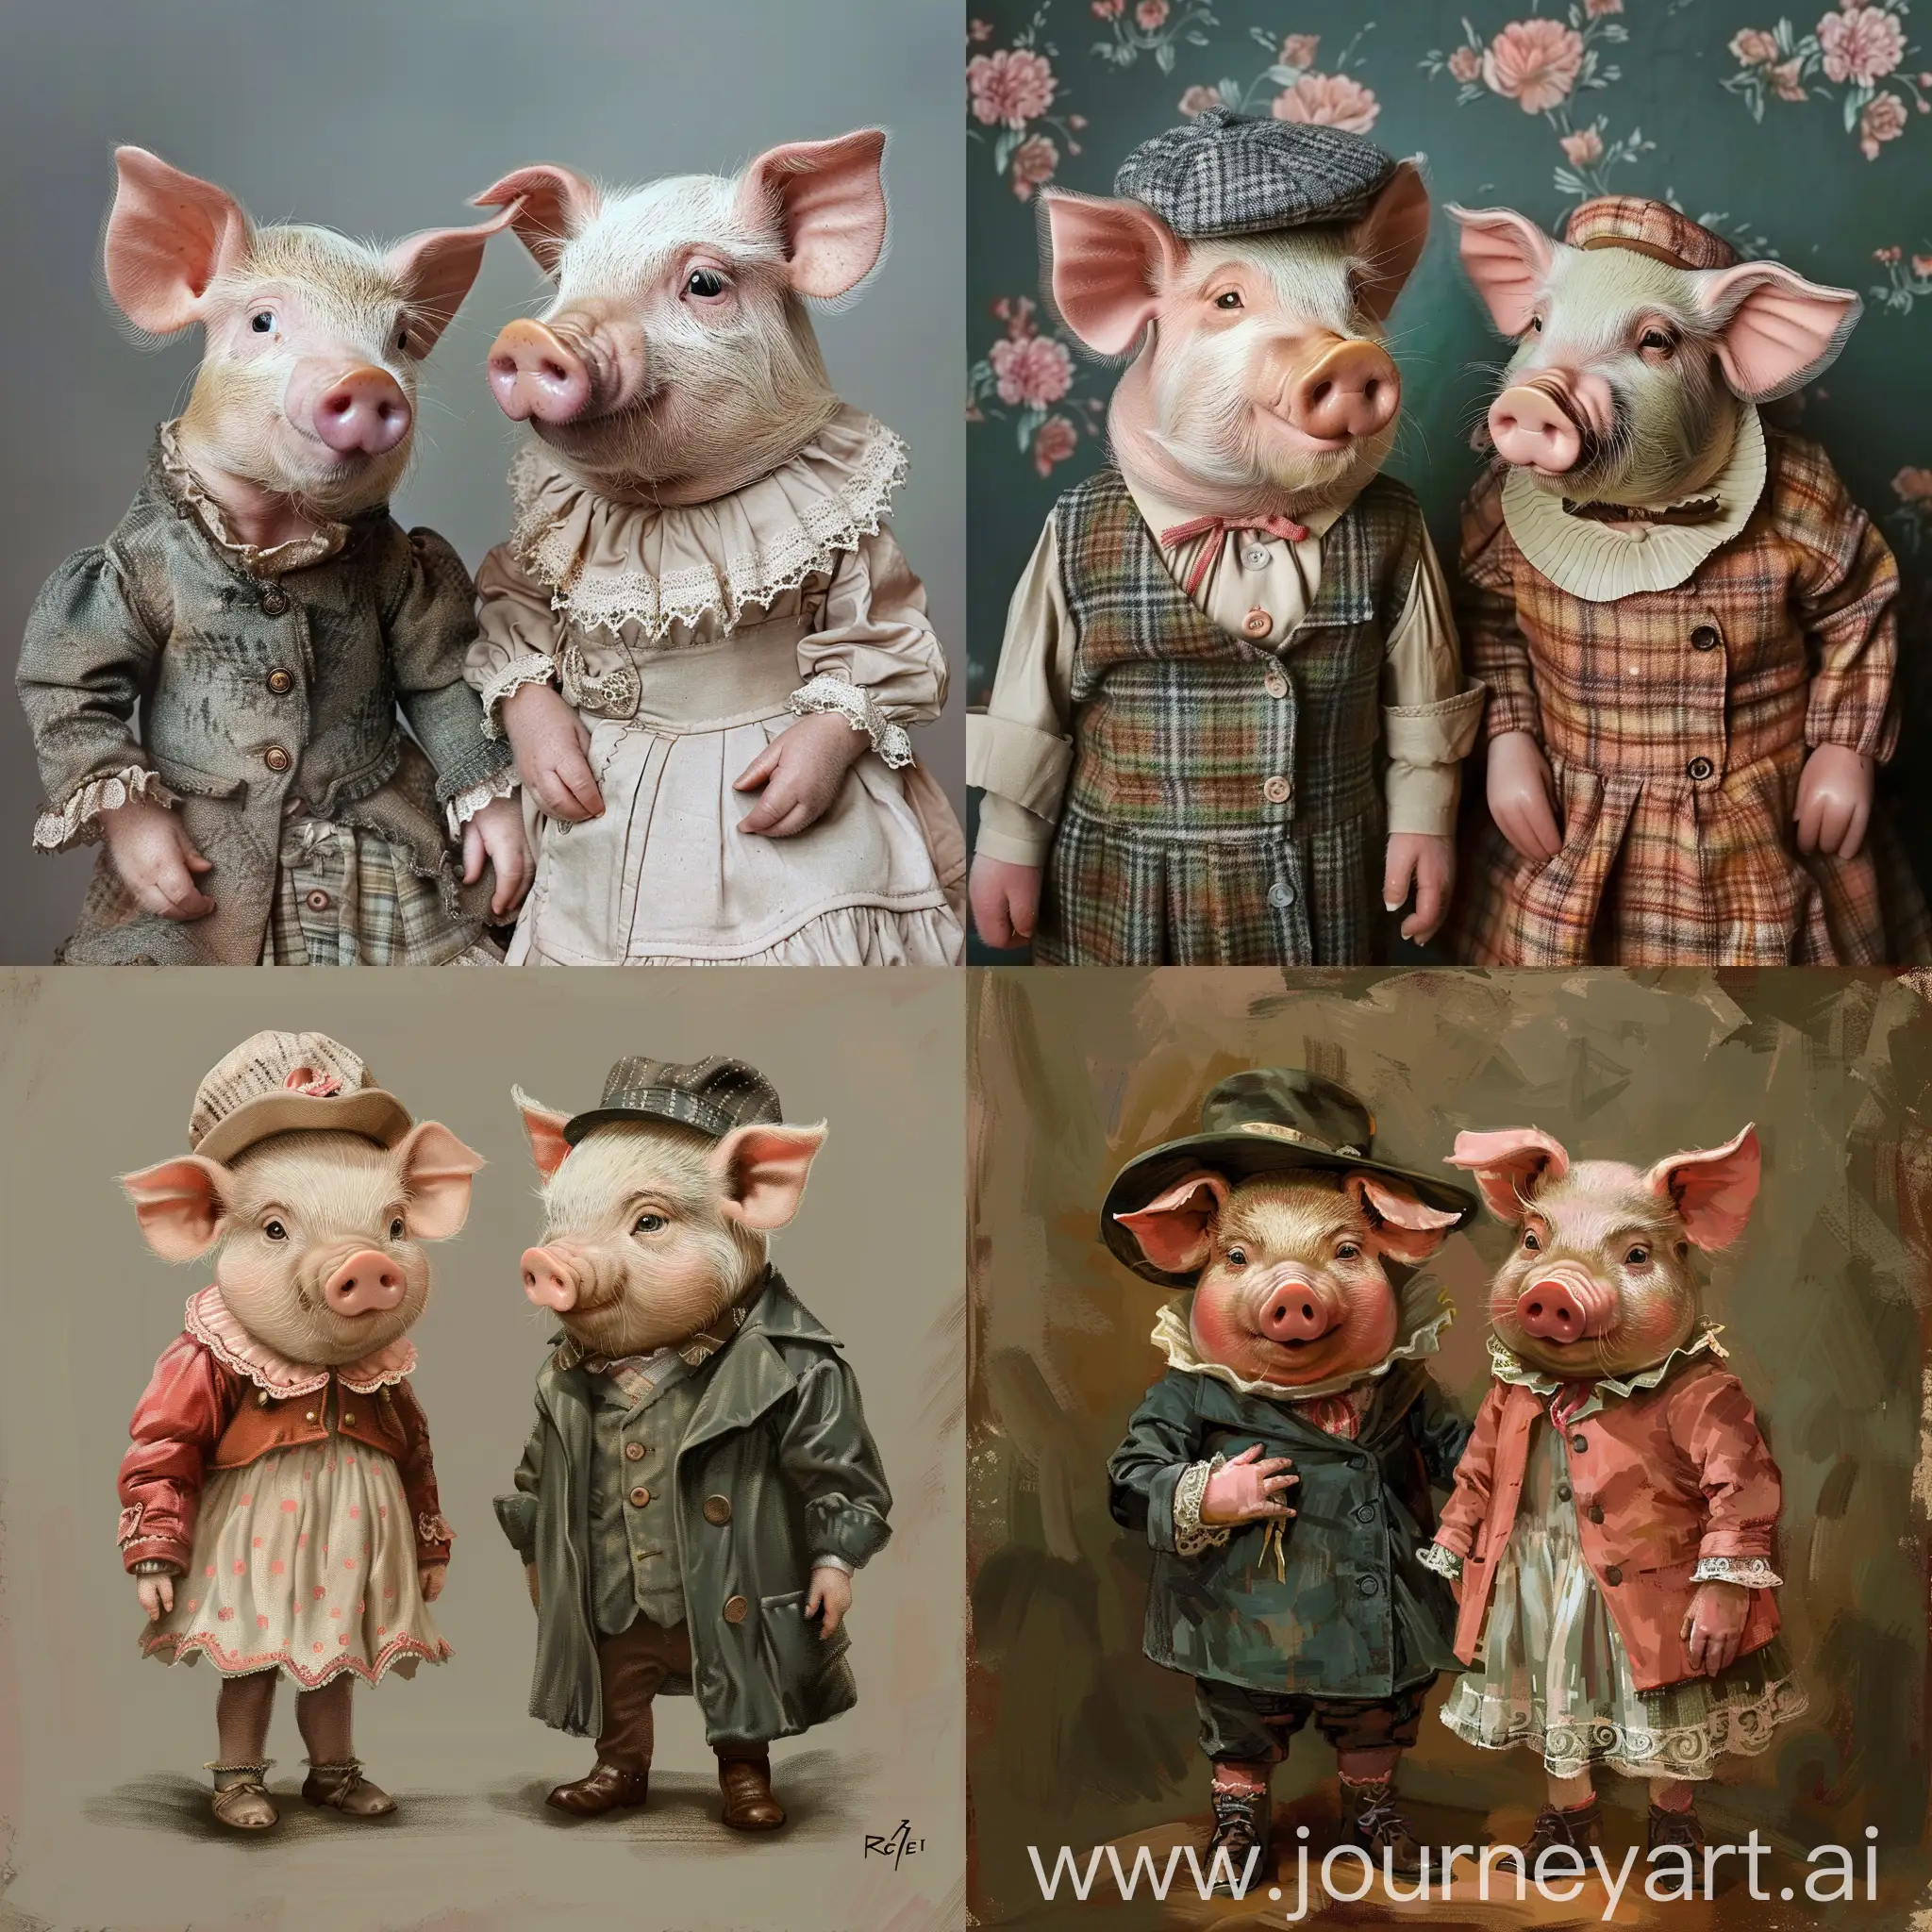 Two little pigs dressed in human clothes.